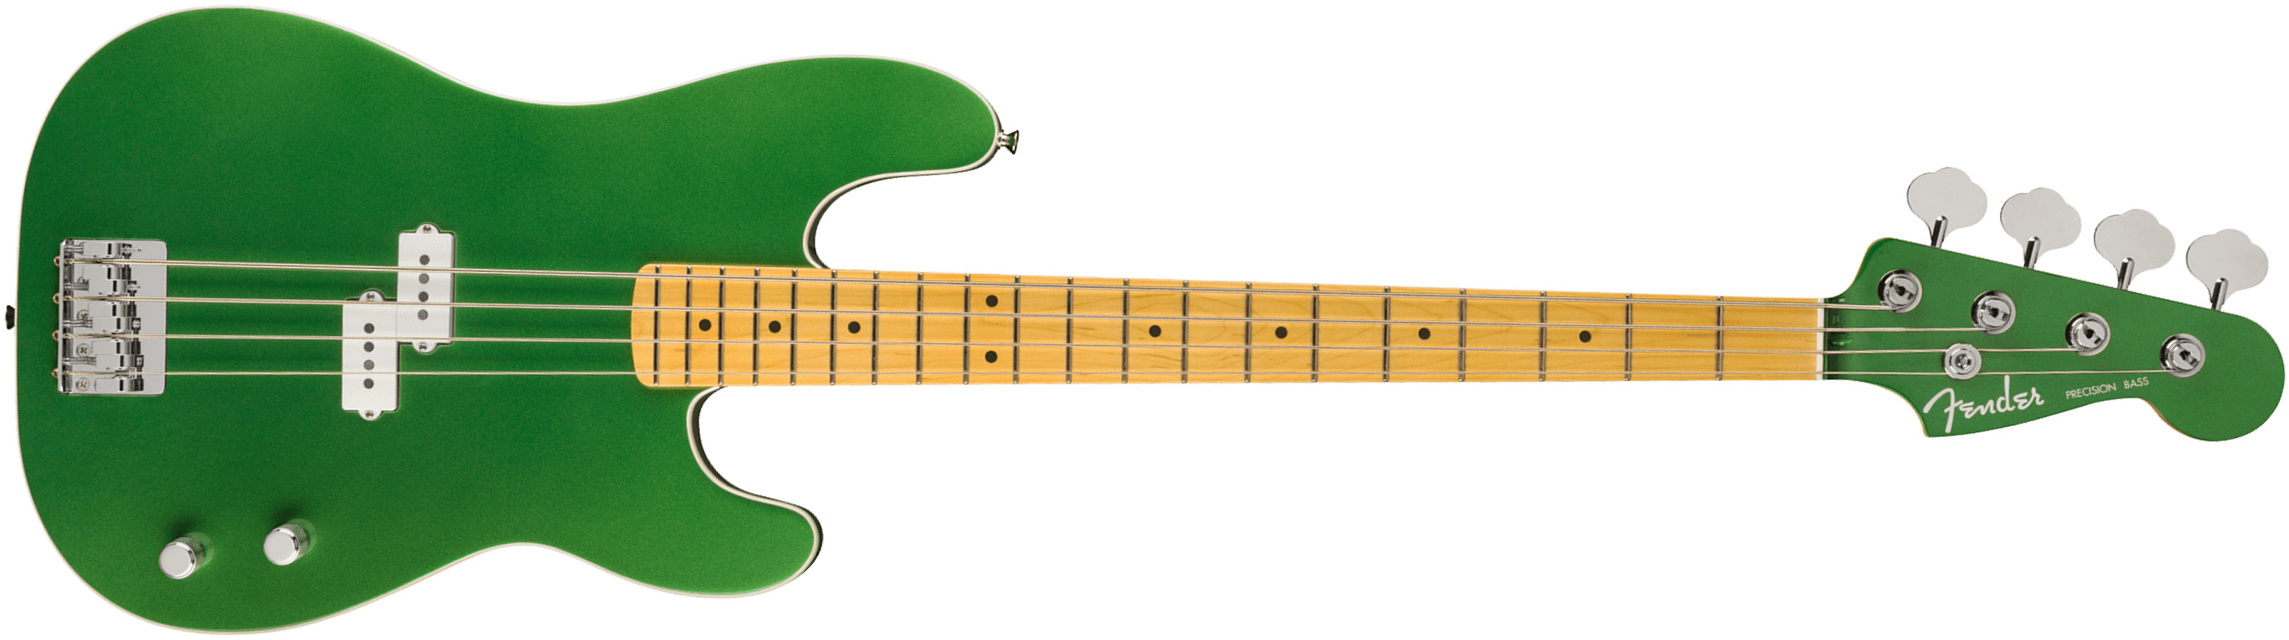 Fender Precision Bass Aerodyne Special Jap Mn - Speed Green Metallic - Basse Électrique Solid Body - Main picture